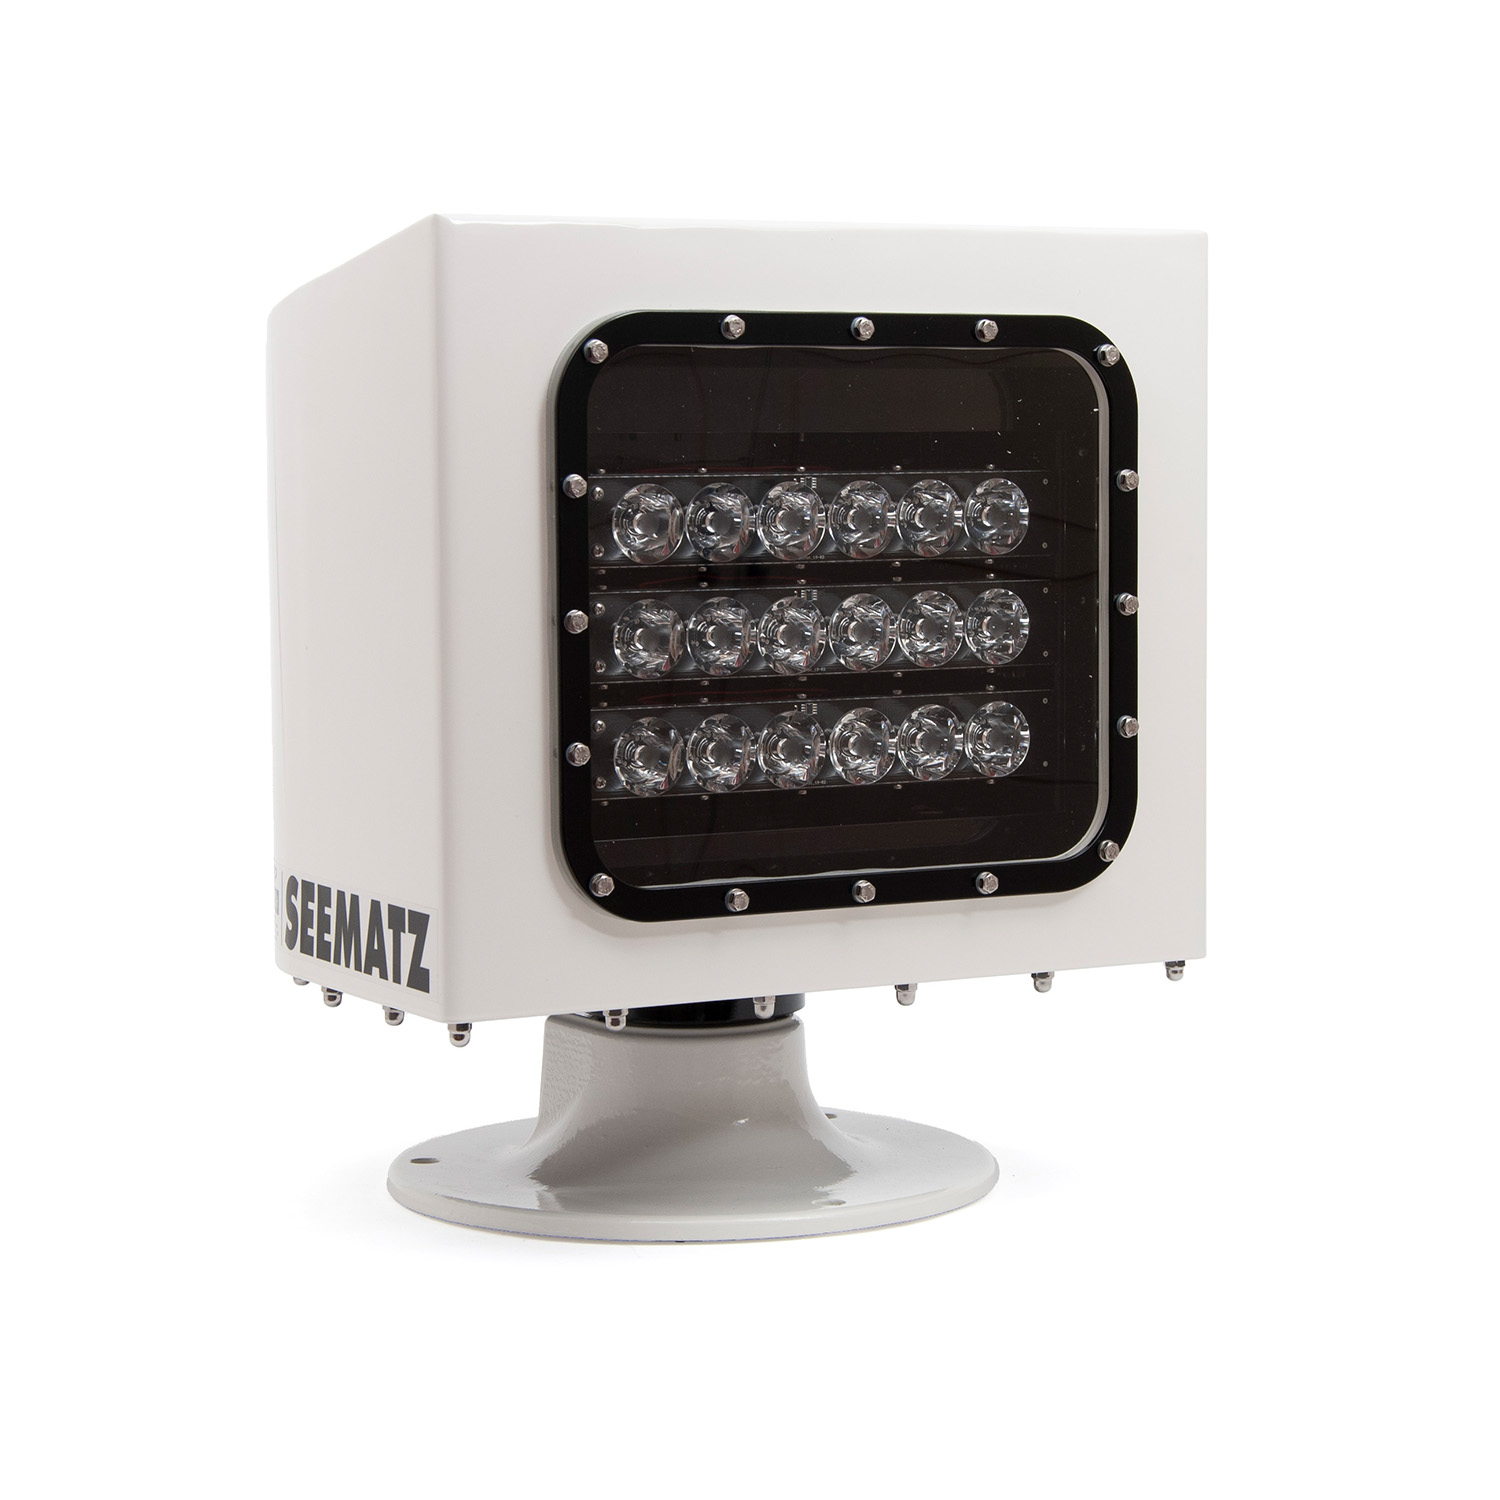 LED X LIGHT 24VDC Light up to 160W 24V Up to 1500m range, 170m field of view